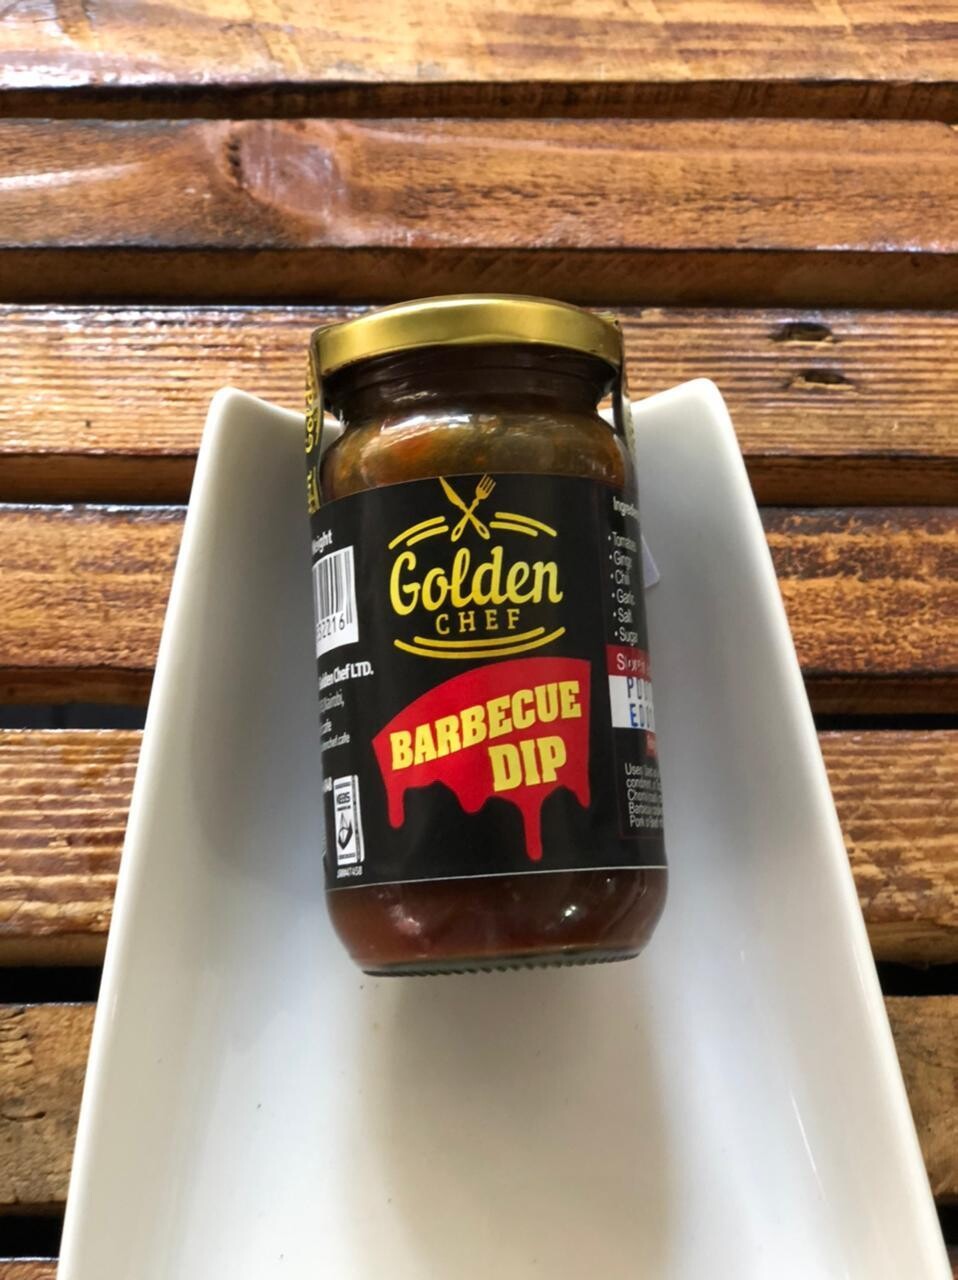 Golden chef barbecue dip sauce 180g